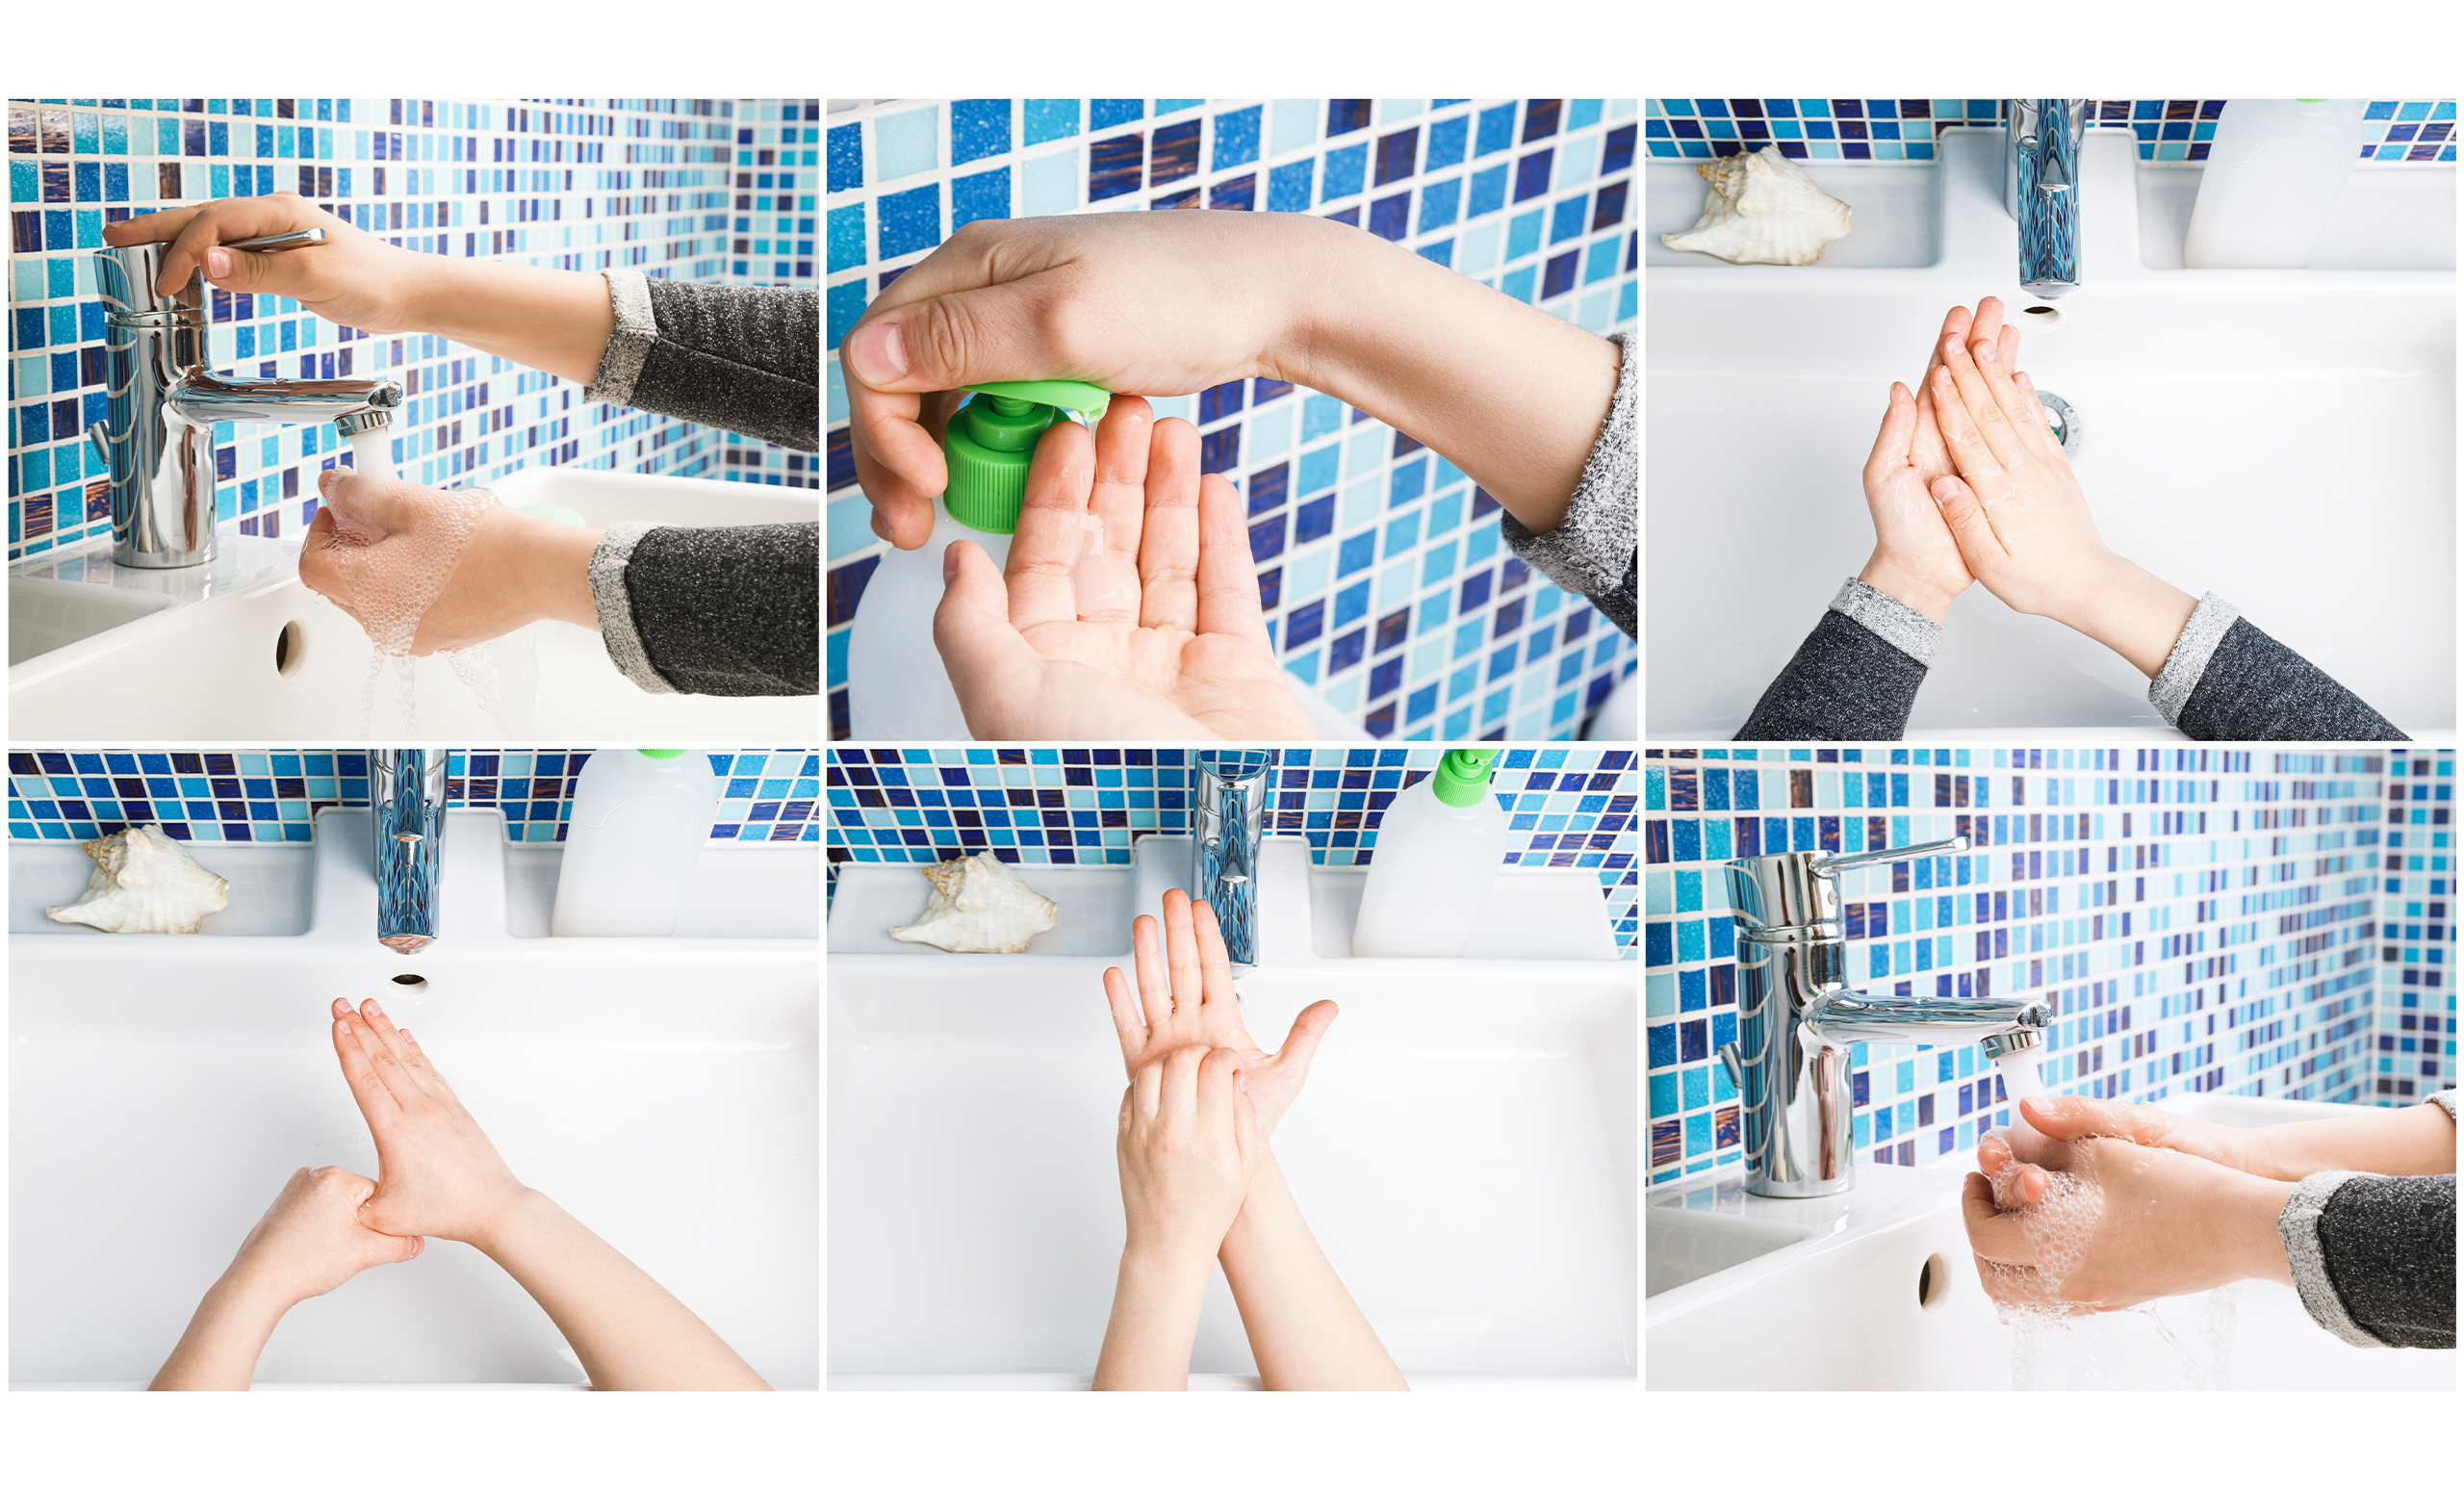 How to wash hands properly?